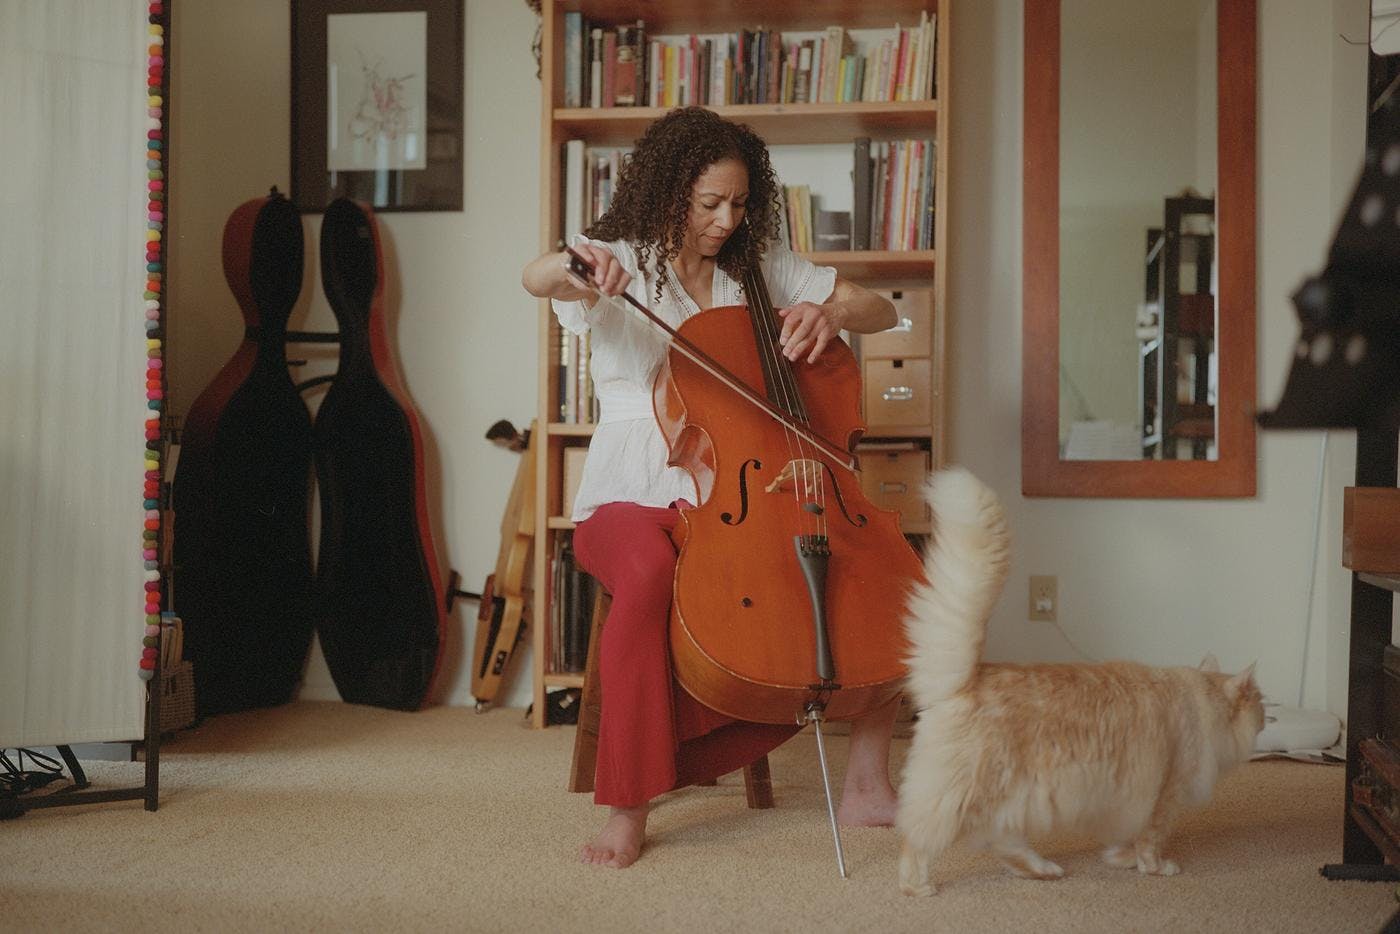 Gretchen Yanover plays her cello at home while a cat walks past her